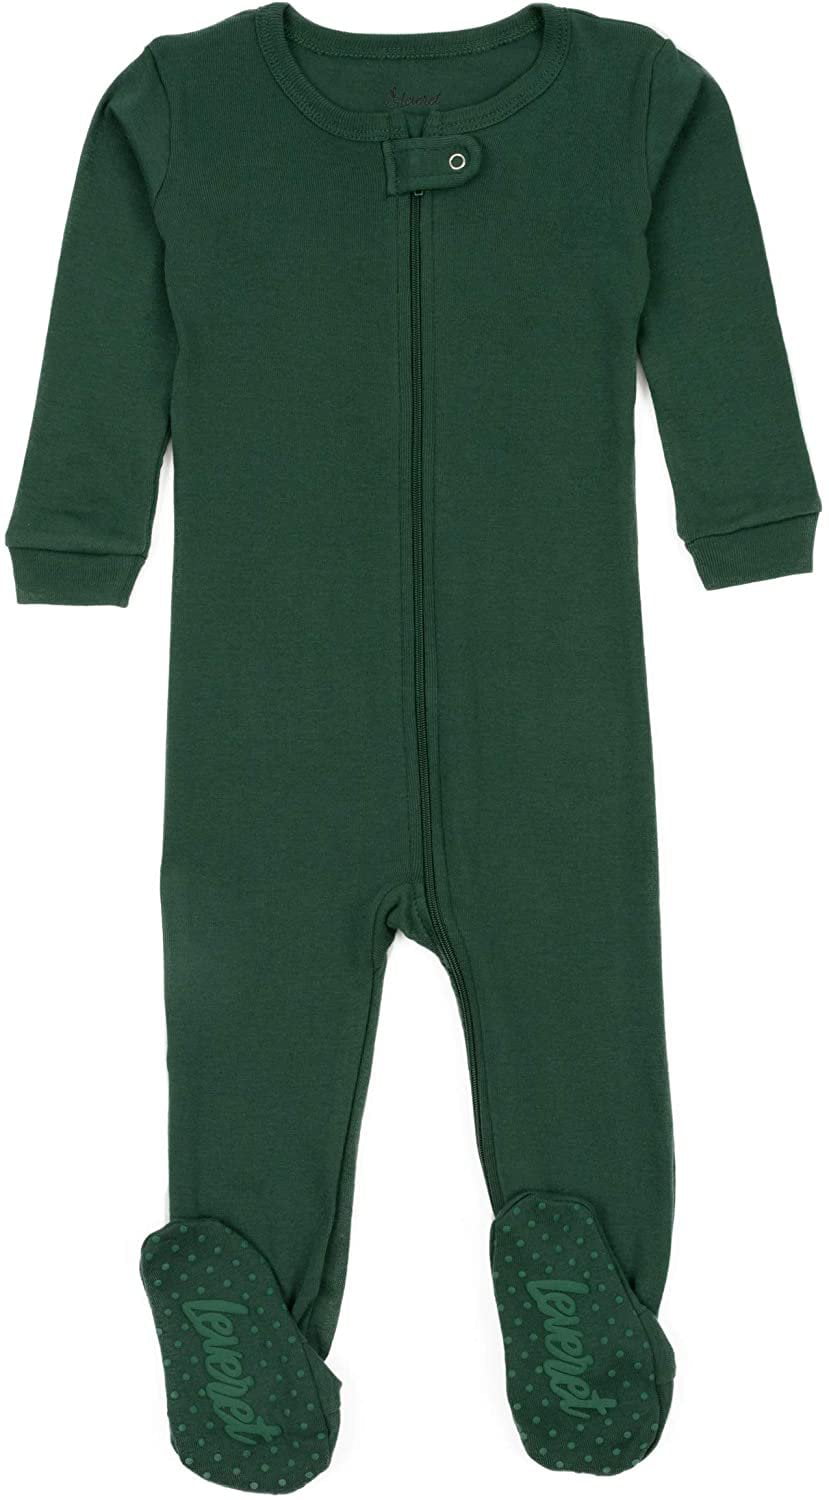 Leveret Solid Kids Pajamas Boys & Girls Footed Pajamas 100% Cotton Size 3 Months-5 Years 